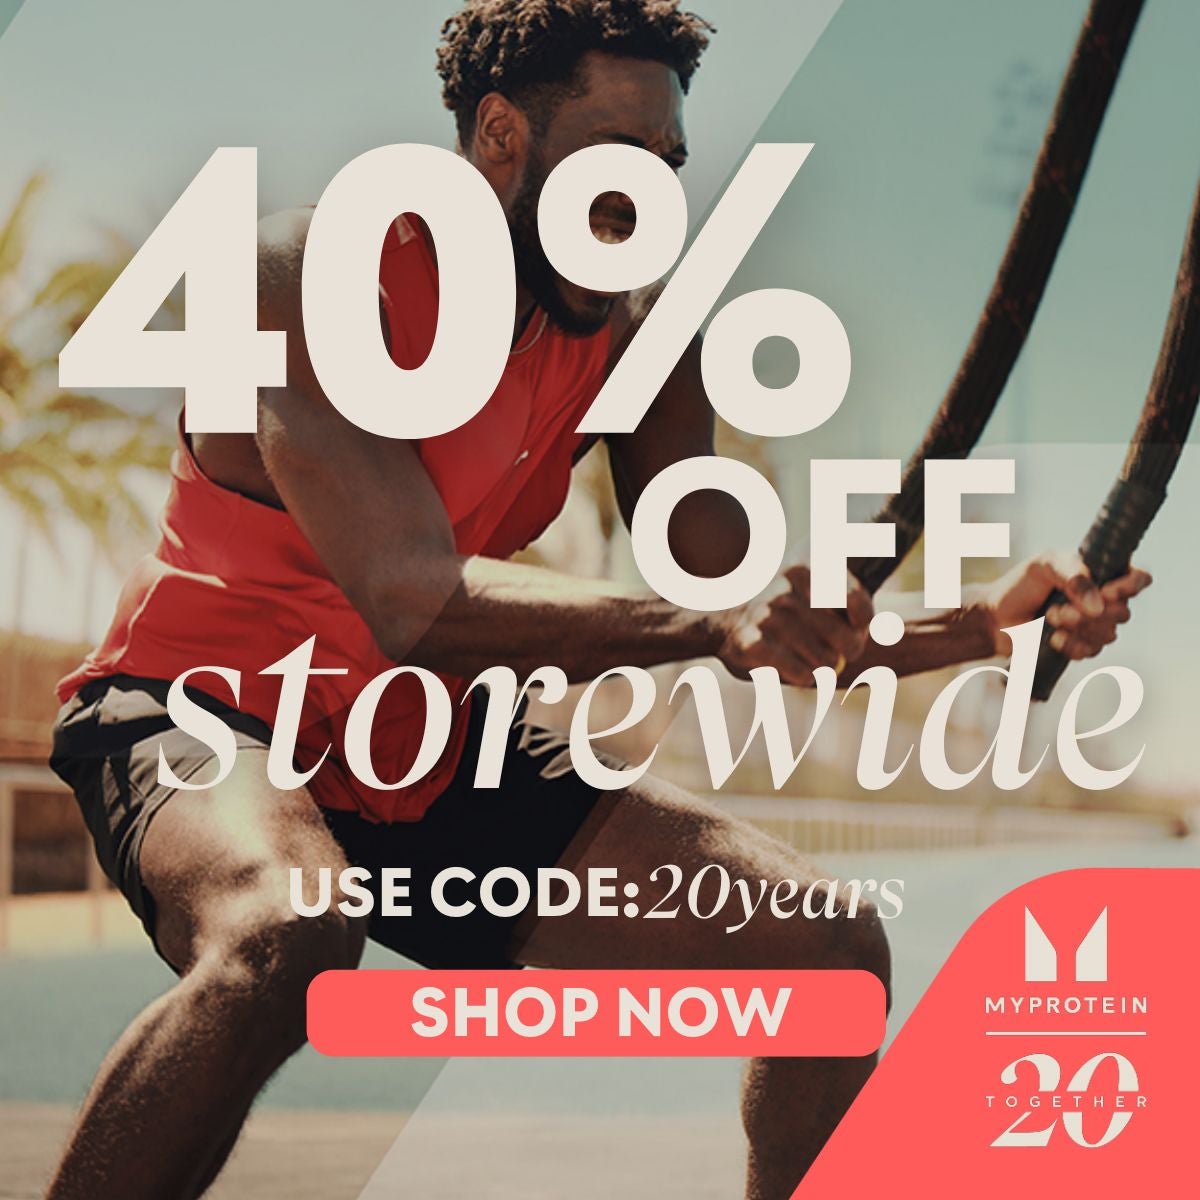 40% Off Storewide Use Code 20years